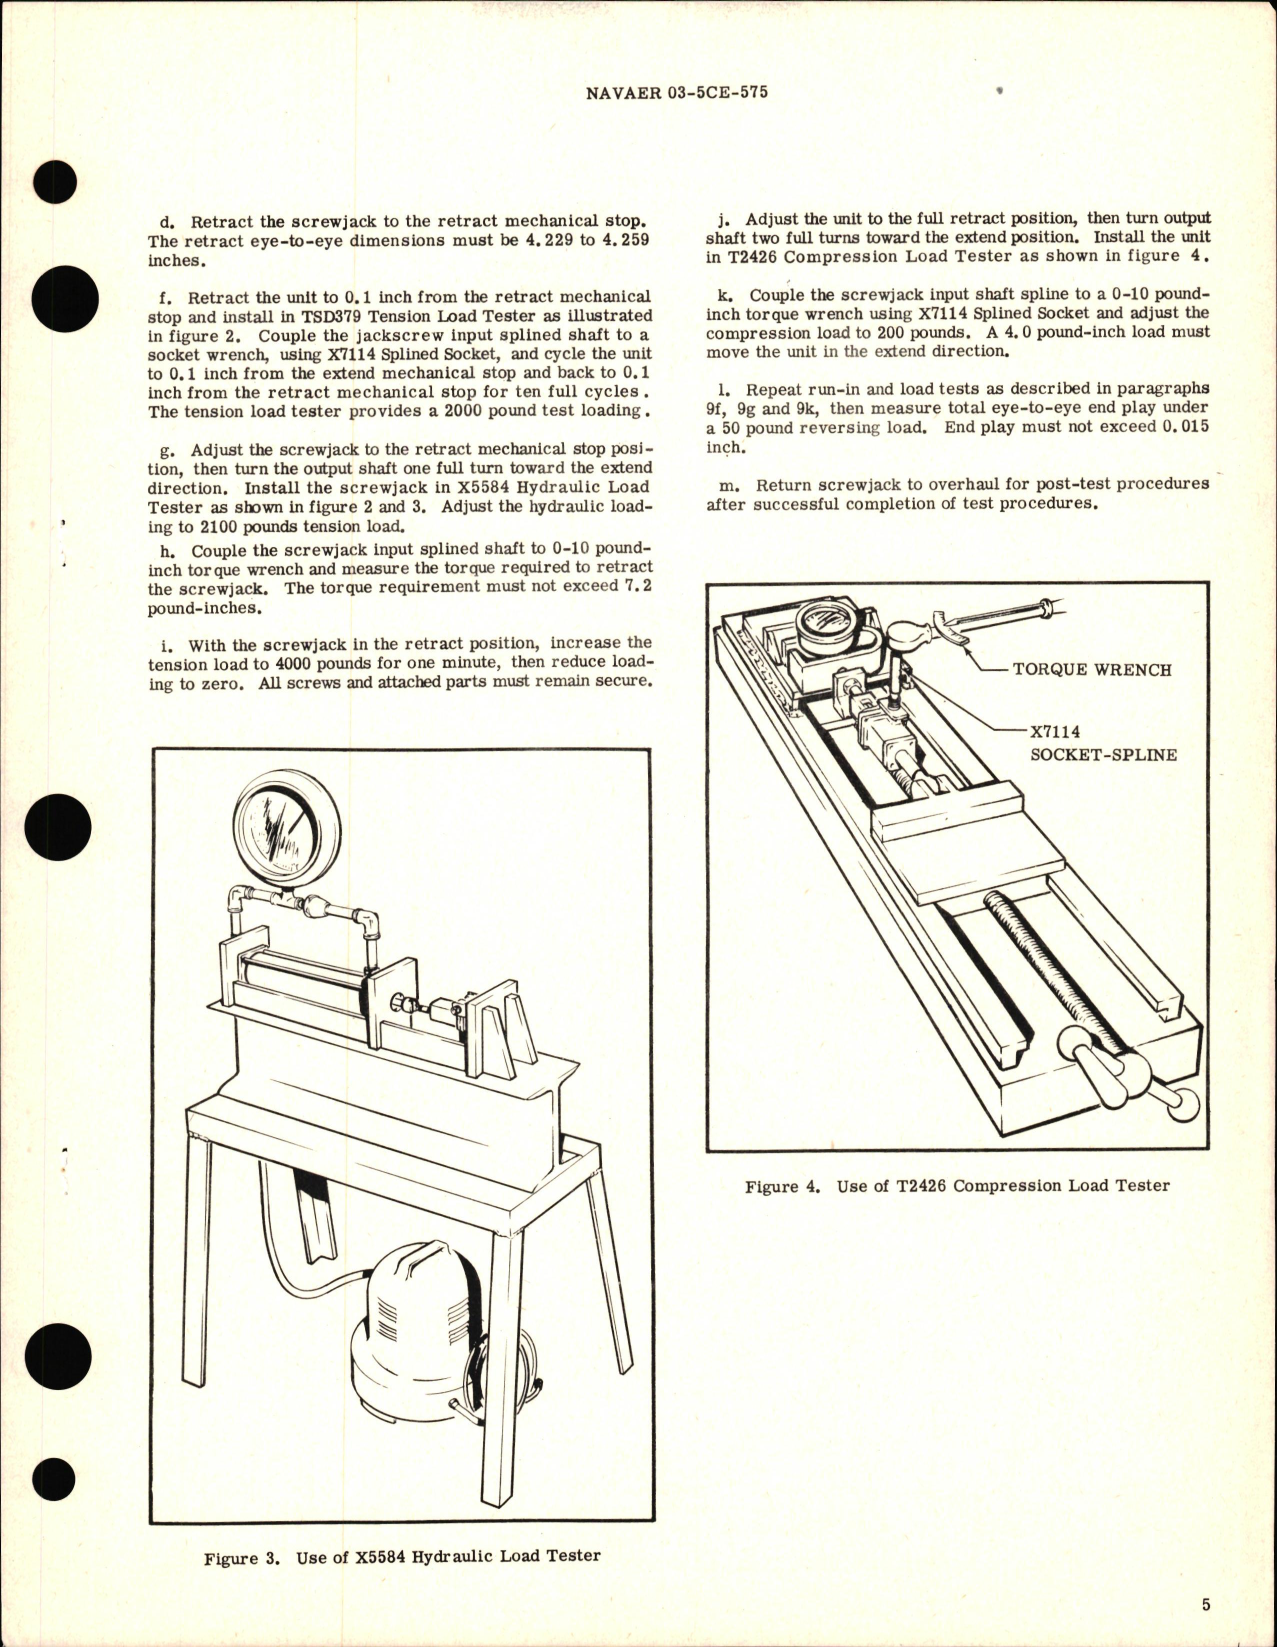 Sample page 5 from AirCorps Library document: Overhaul Instructions with Parts Breakdown for Wing, Leading Edge, Flap and Screwjack - Part 471T100-1 and 471T100-301 